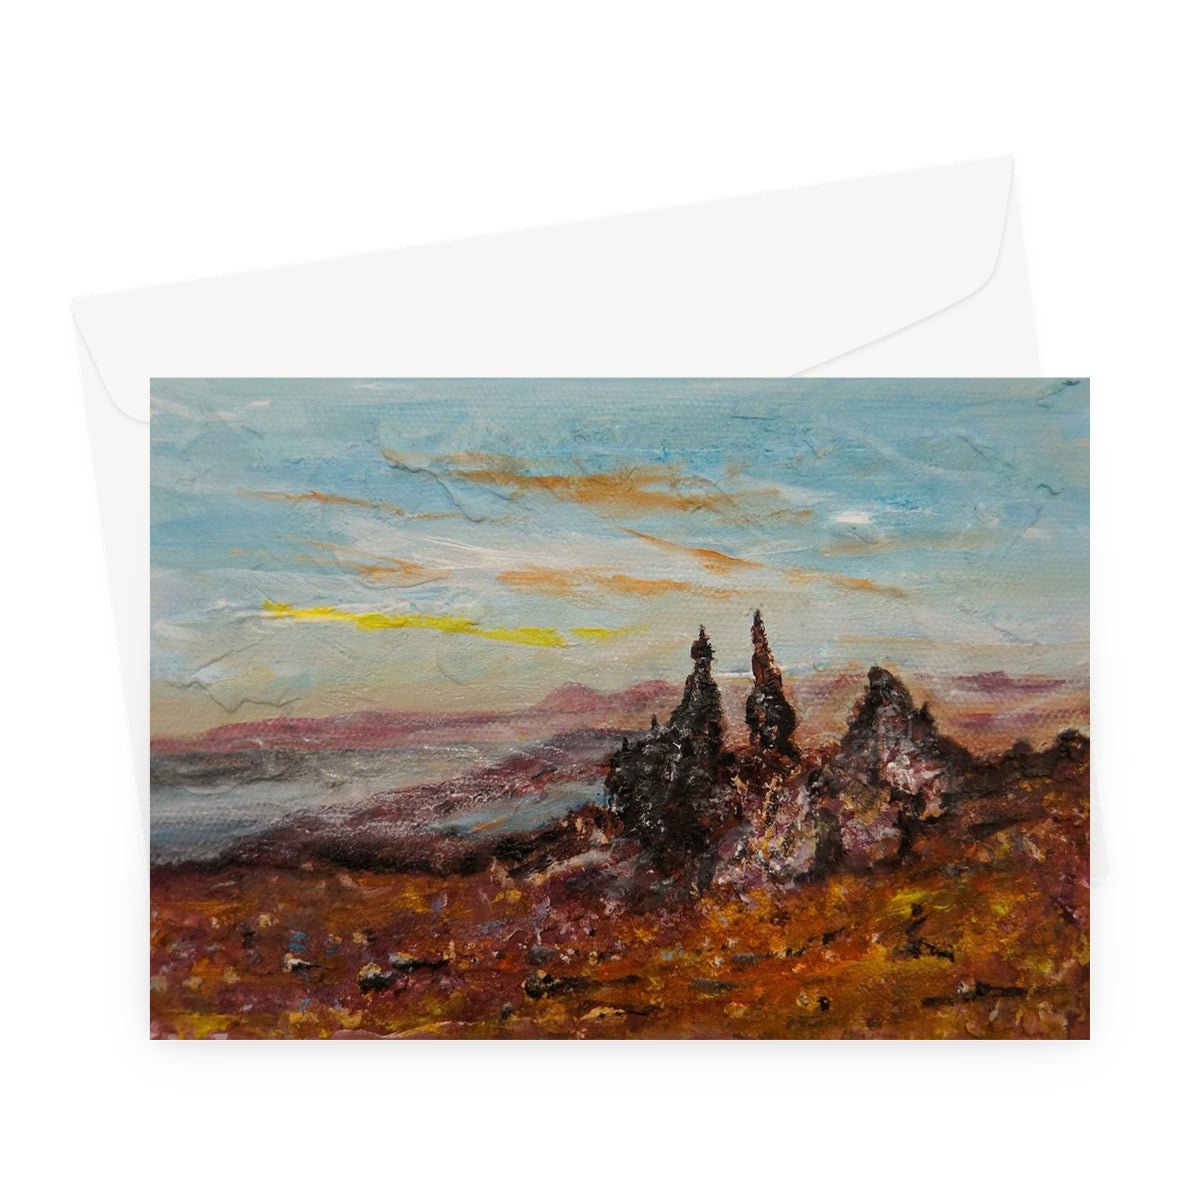 The Old Man Of Storr Skye Art Gifts Greeting Card-Greetings Cards-Skye Art Gallery-A5 Landscape-10 Cards-Paintings, Prints, Homeware, Art Gifts From Scotland By Scottish Artist Kevin Hunter